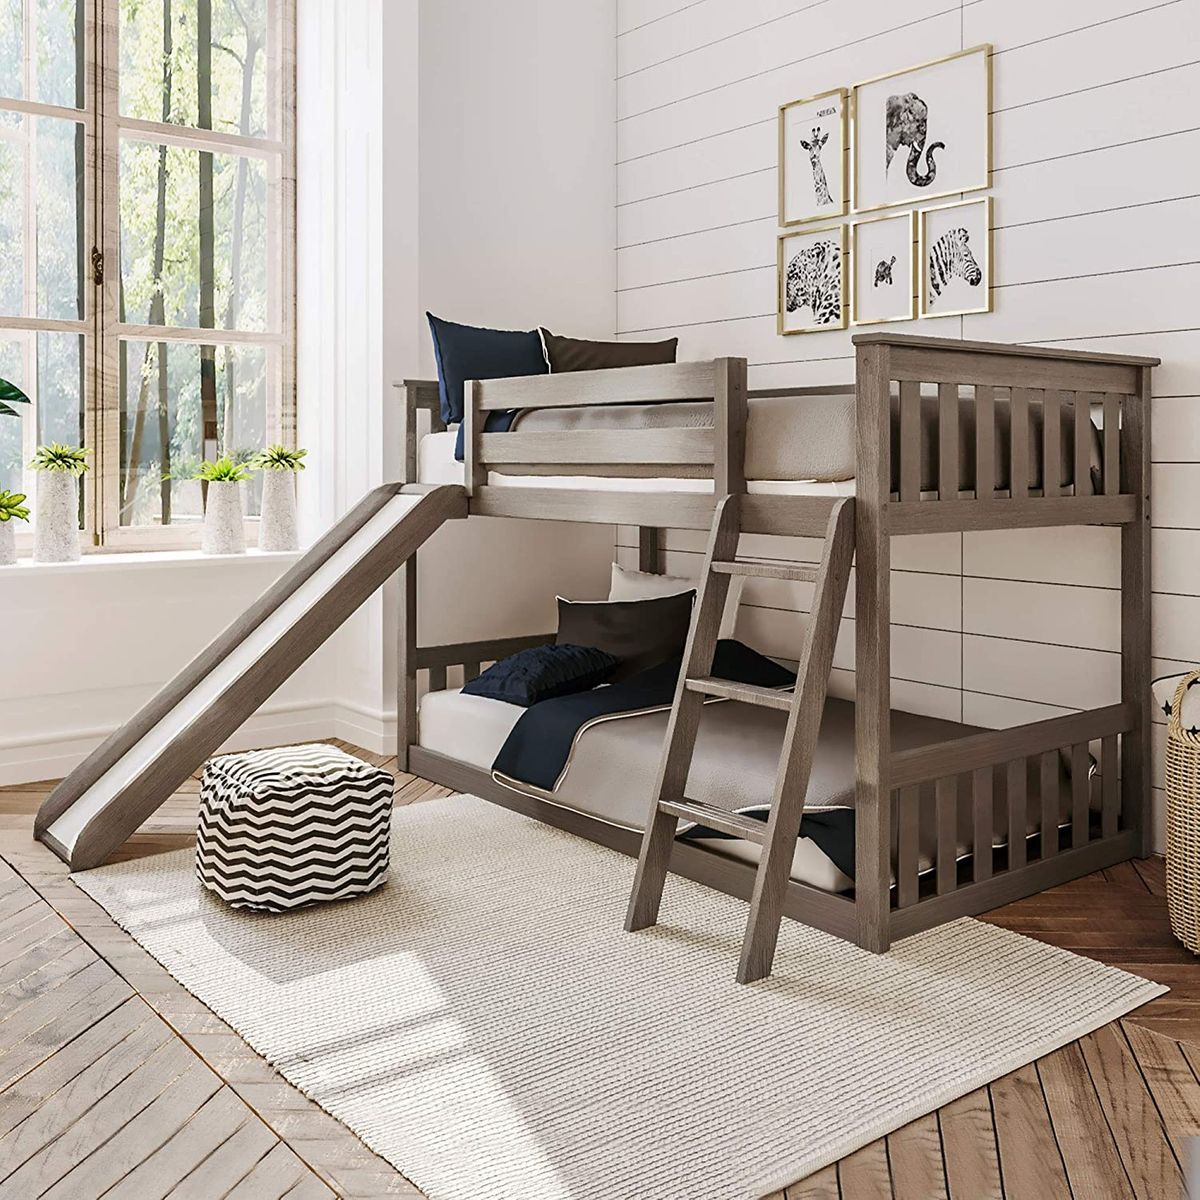 8 Best Bunk Beds 2020 The Strategist, Twin Beds That Convert To Bunk Beds